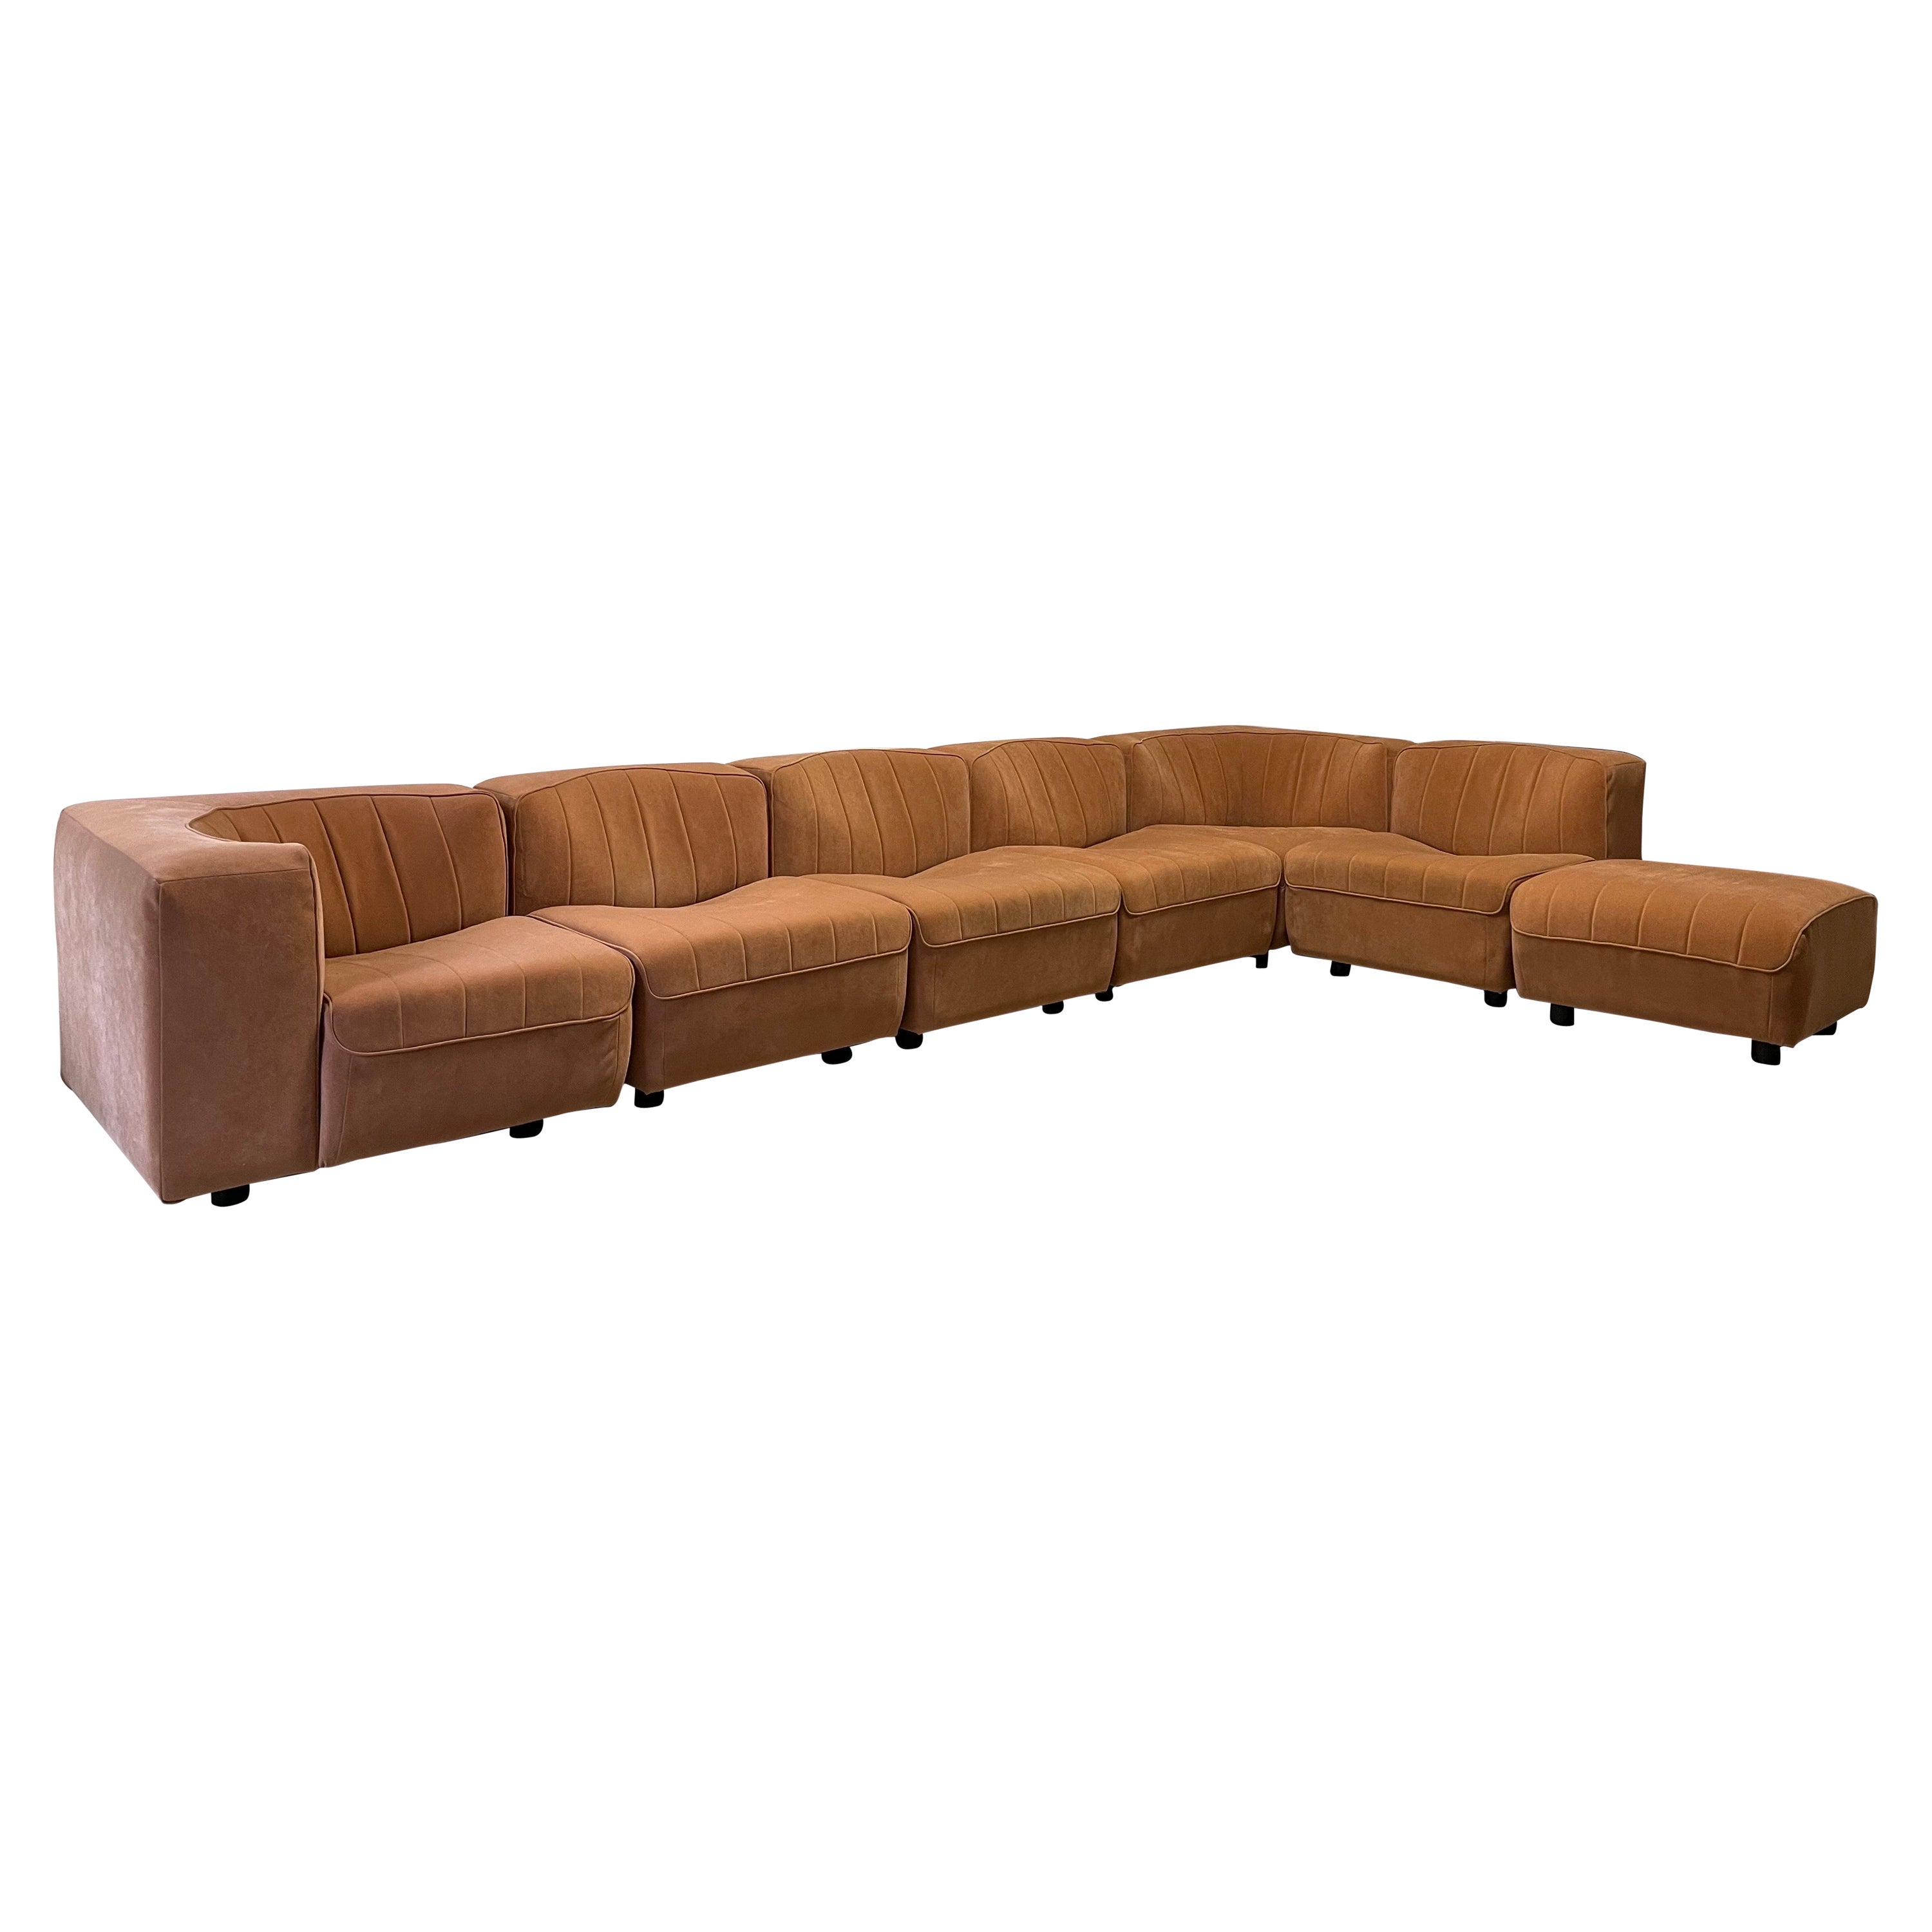 Tito Agnoli Arflex Sectional Sofa Model '9000' in Terracotta Suede Upholstery